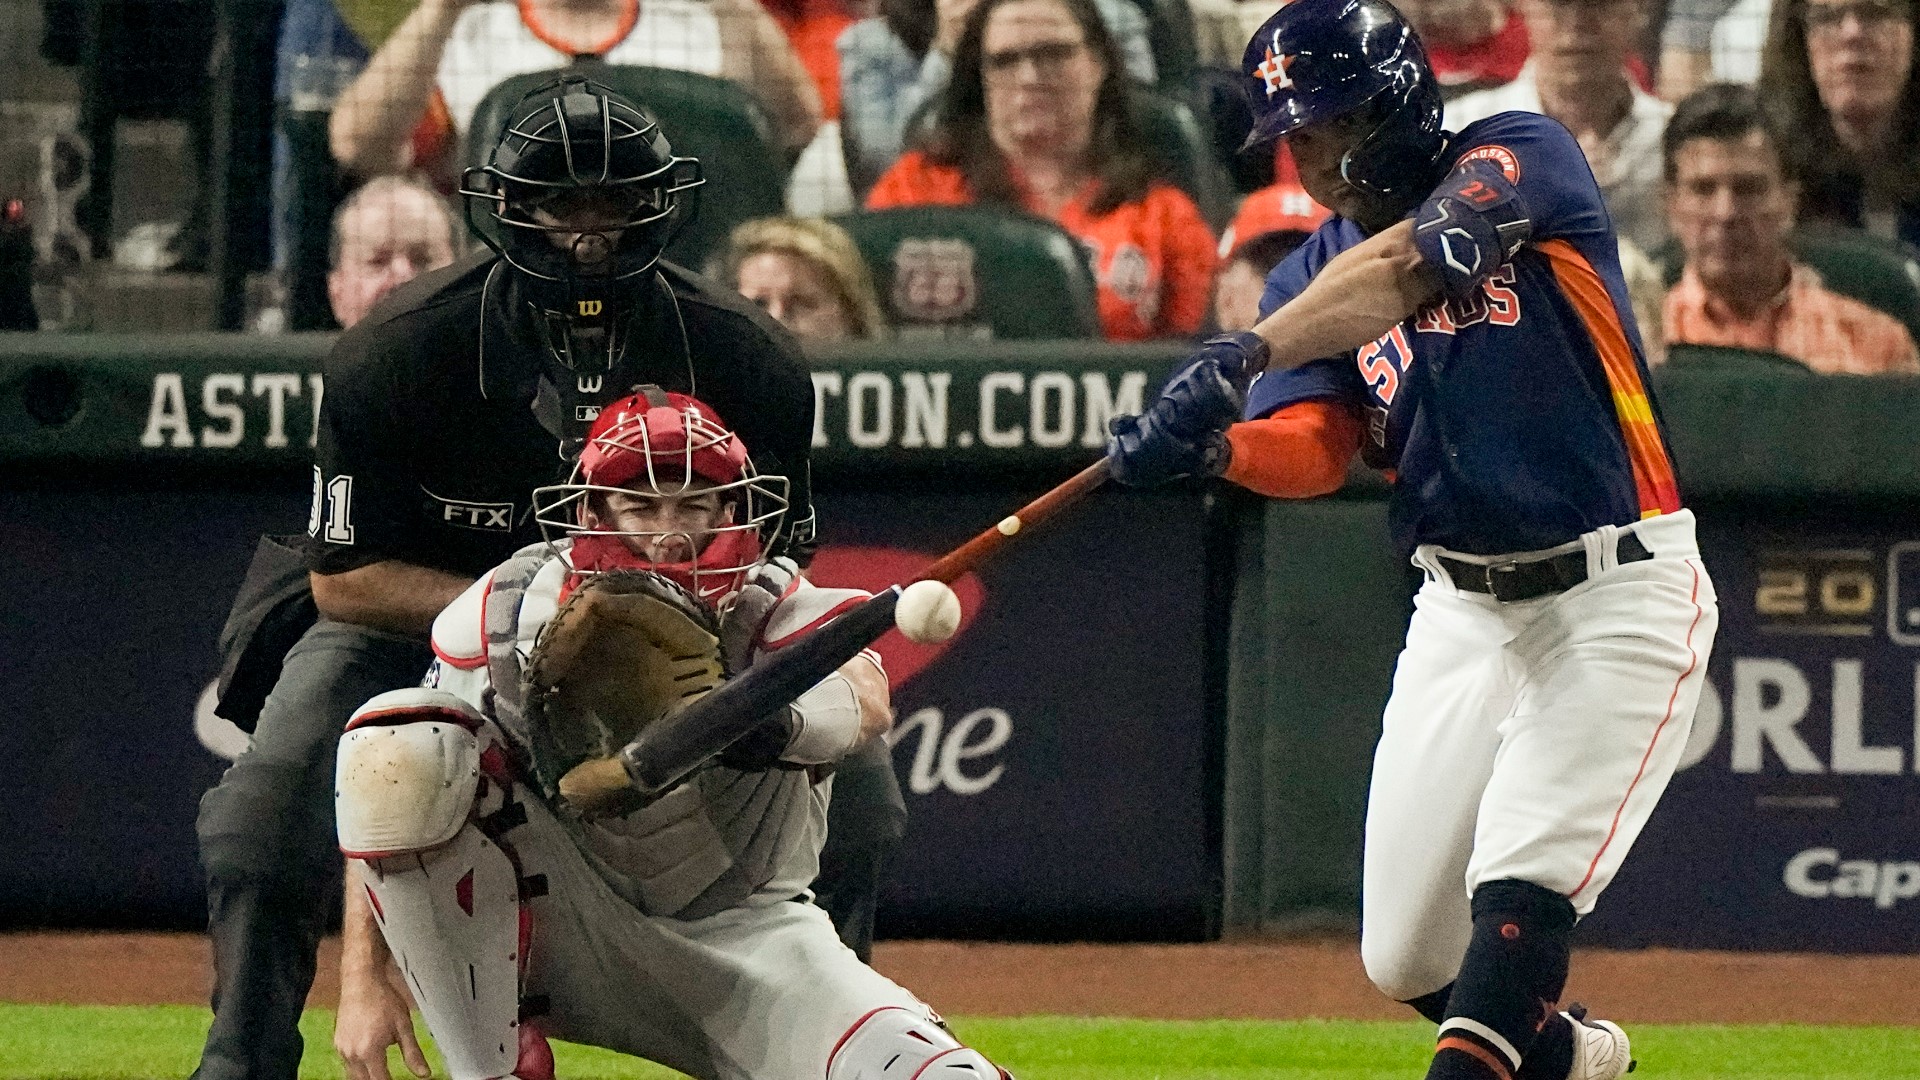 The Astros and Phillies are tied at a game apiece in the World Series after Houston took Game 2.